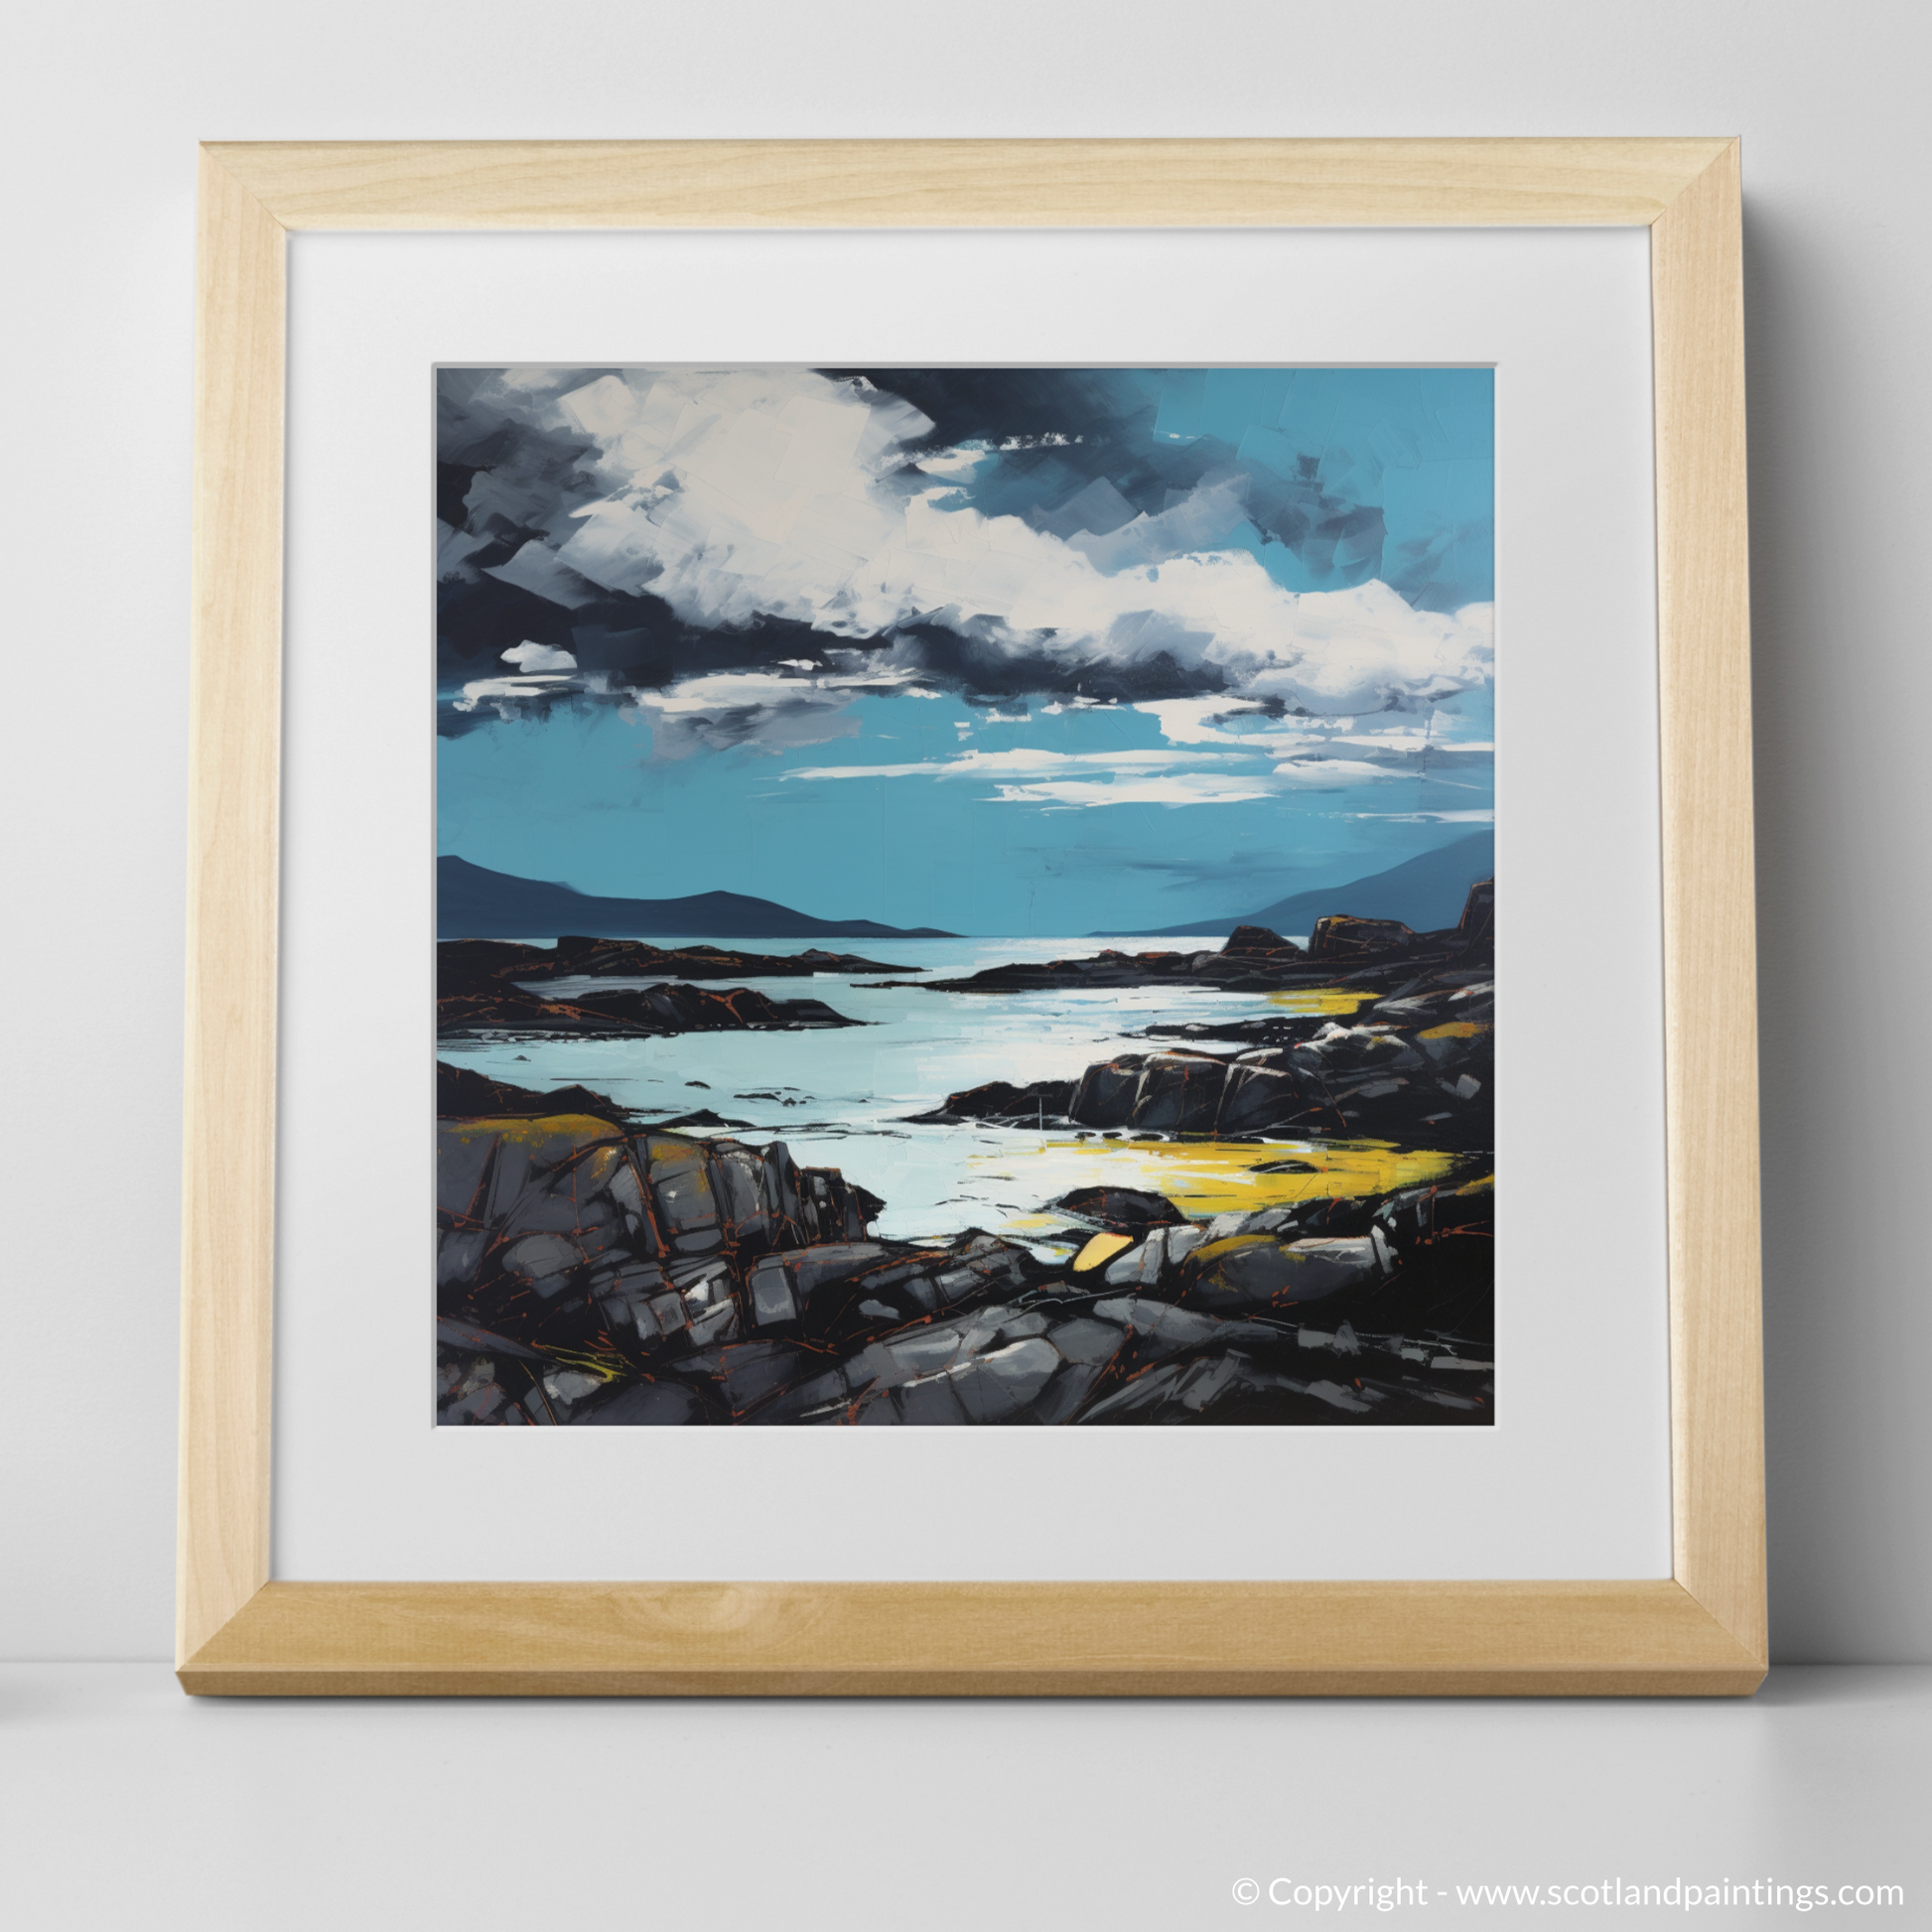 Art Print of Isle of Harris, Outer Hebrides with a natural frame